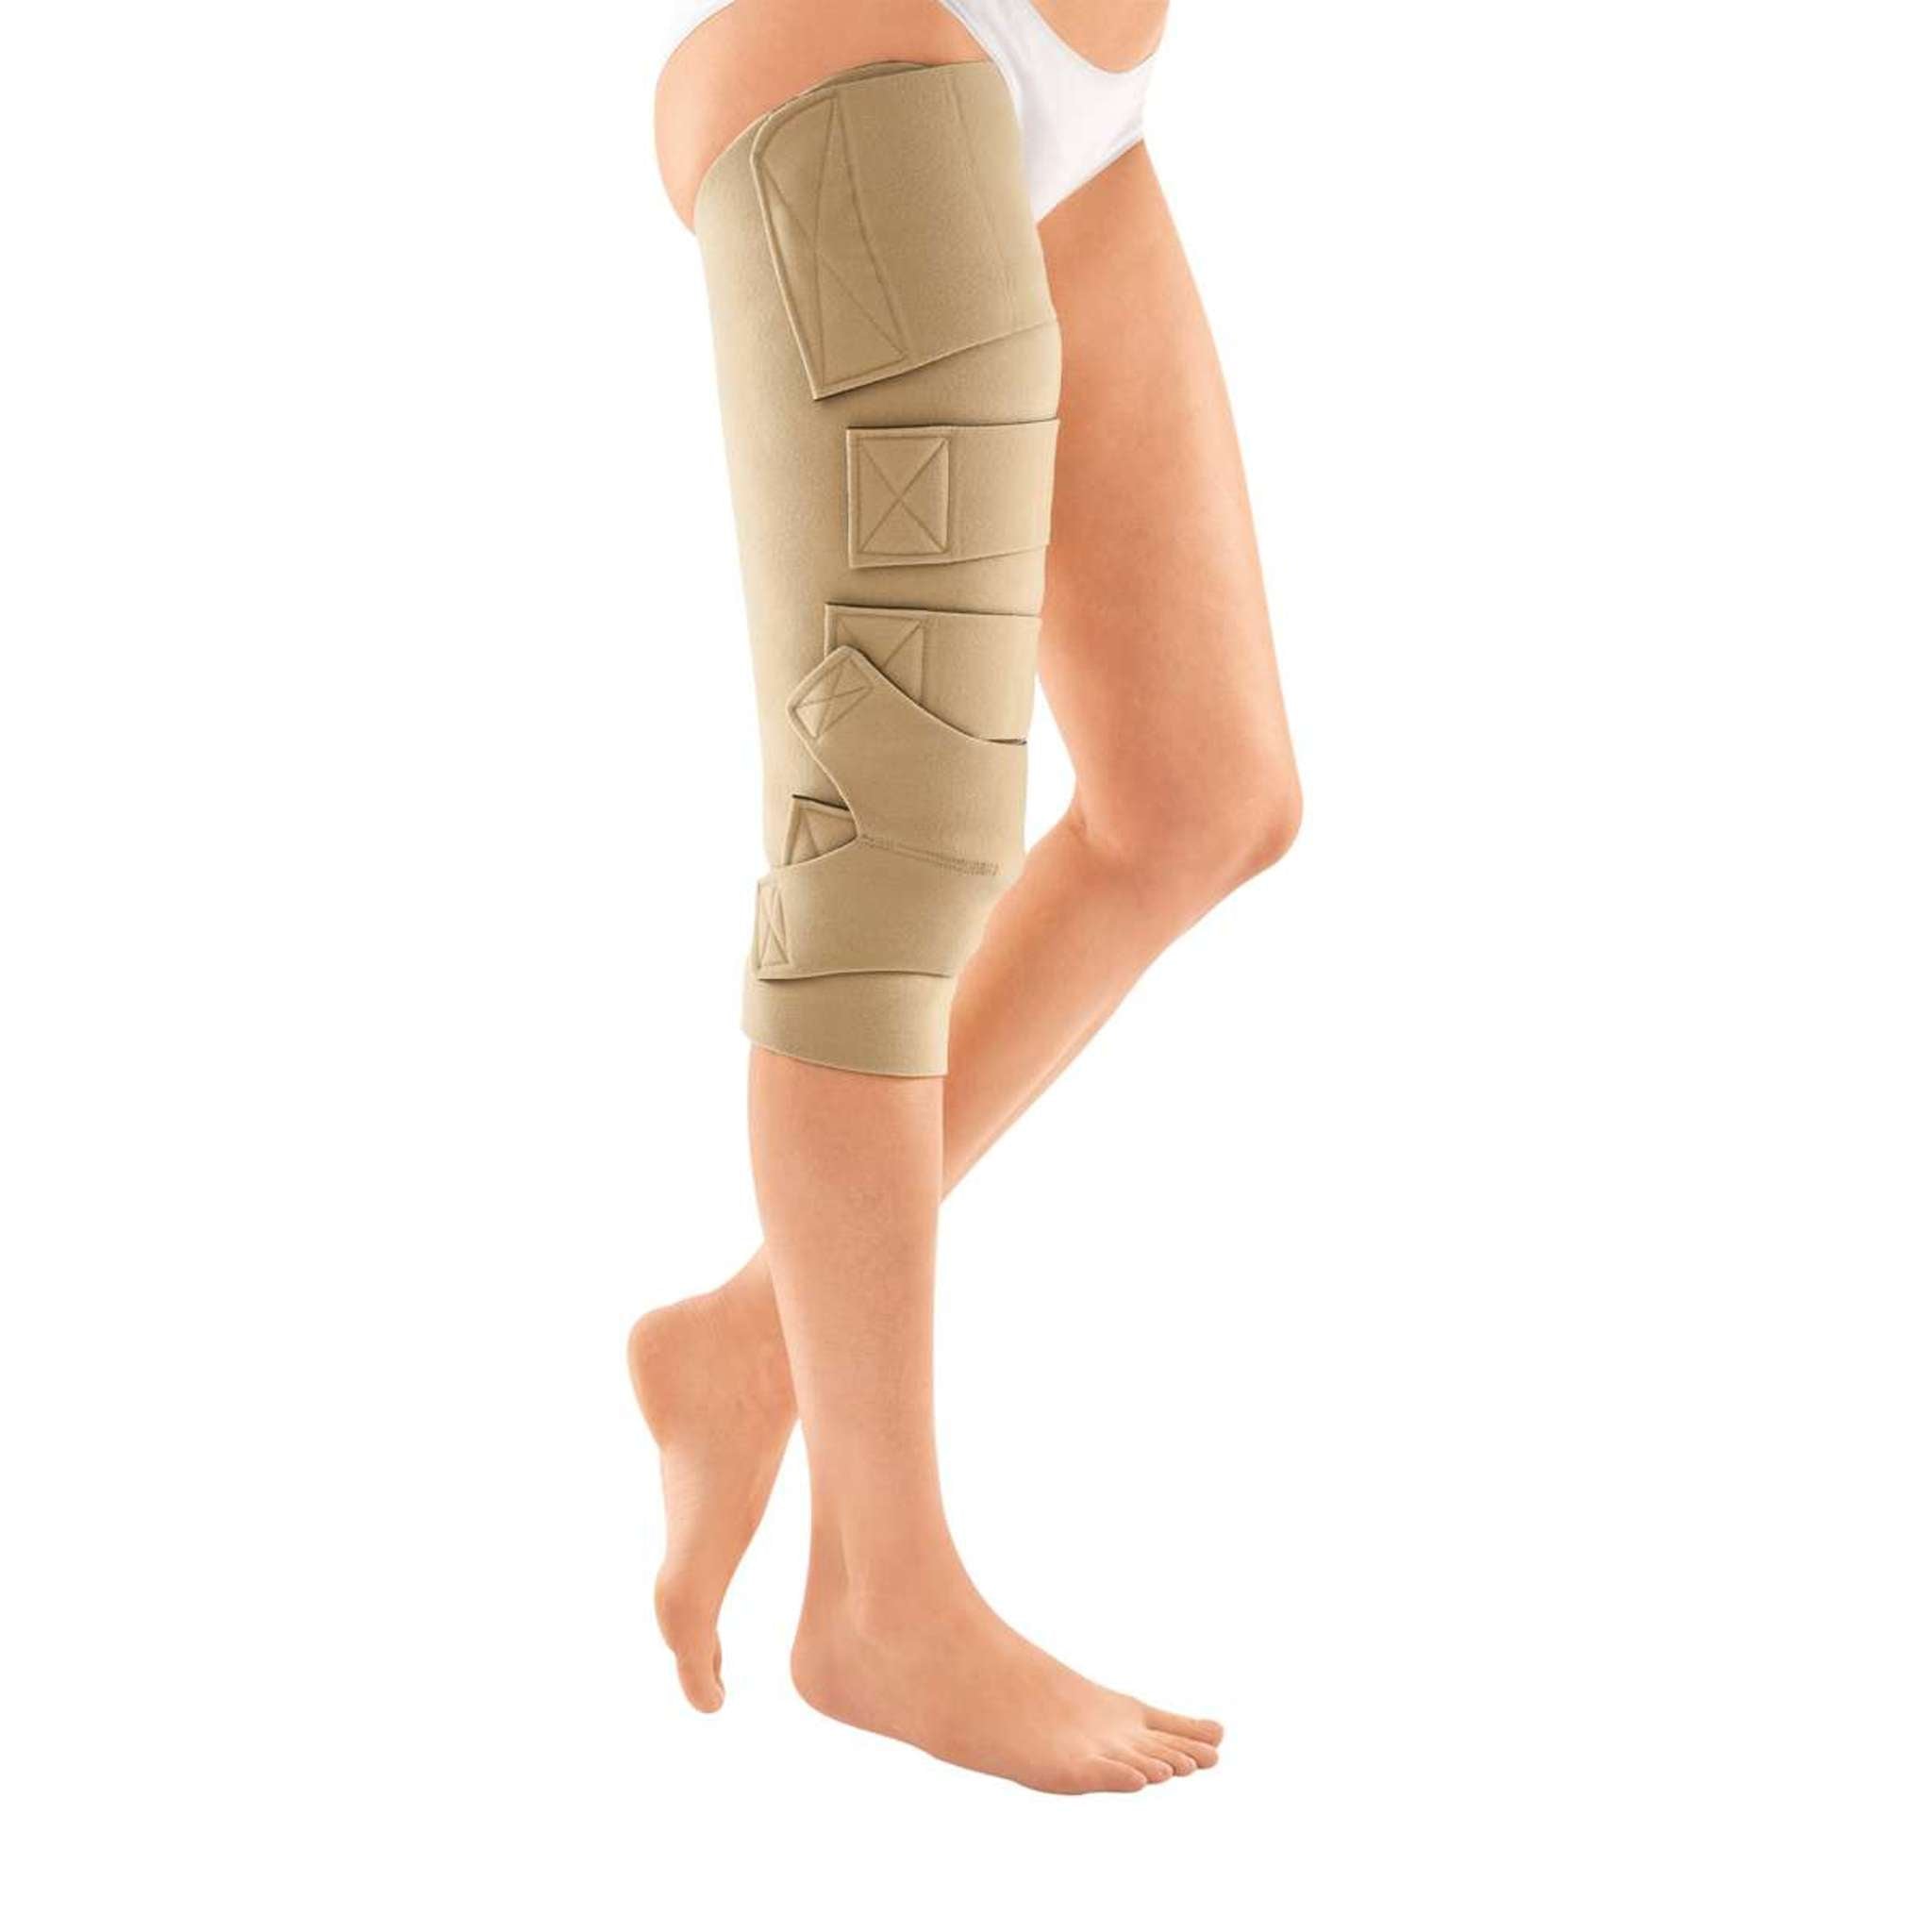 High Waist Compression Girdle Above Knee - Contact Closure with